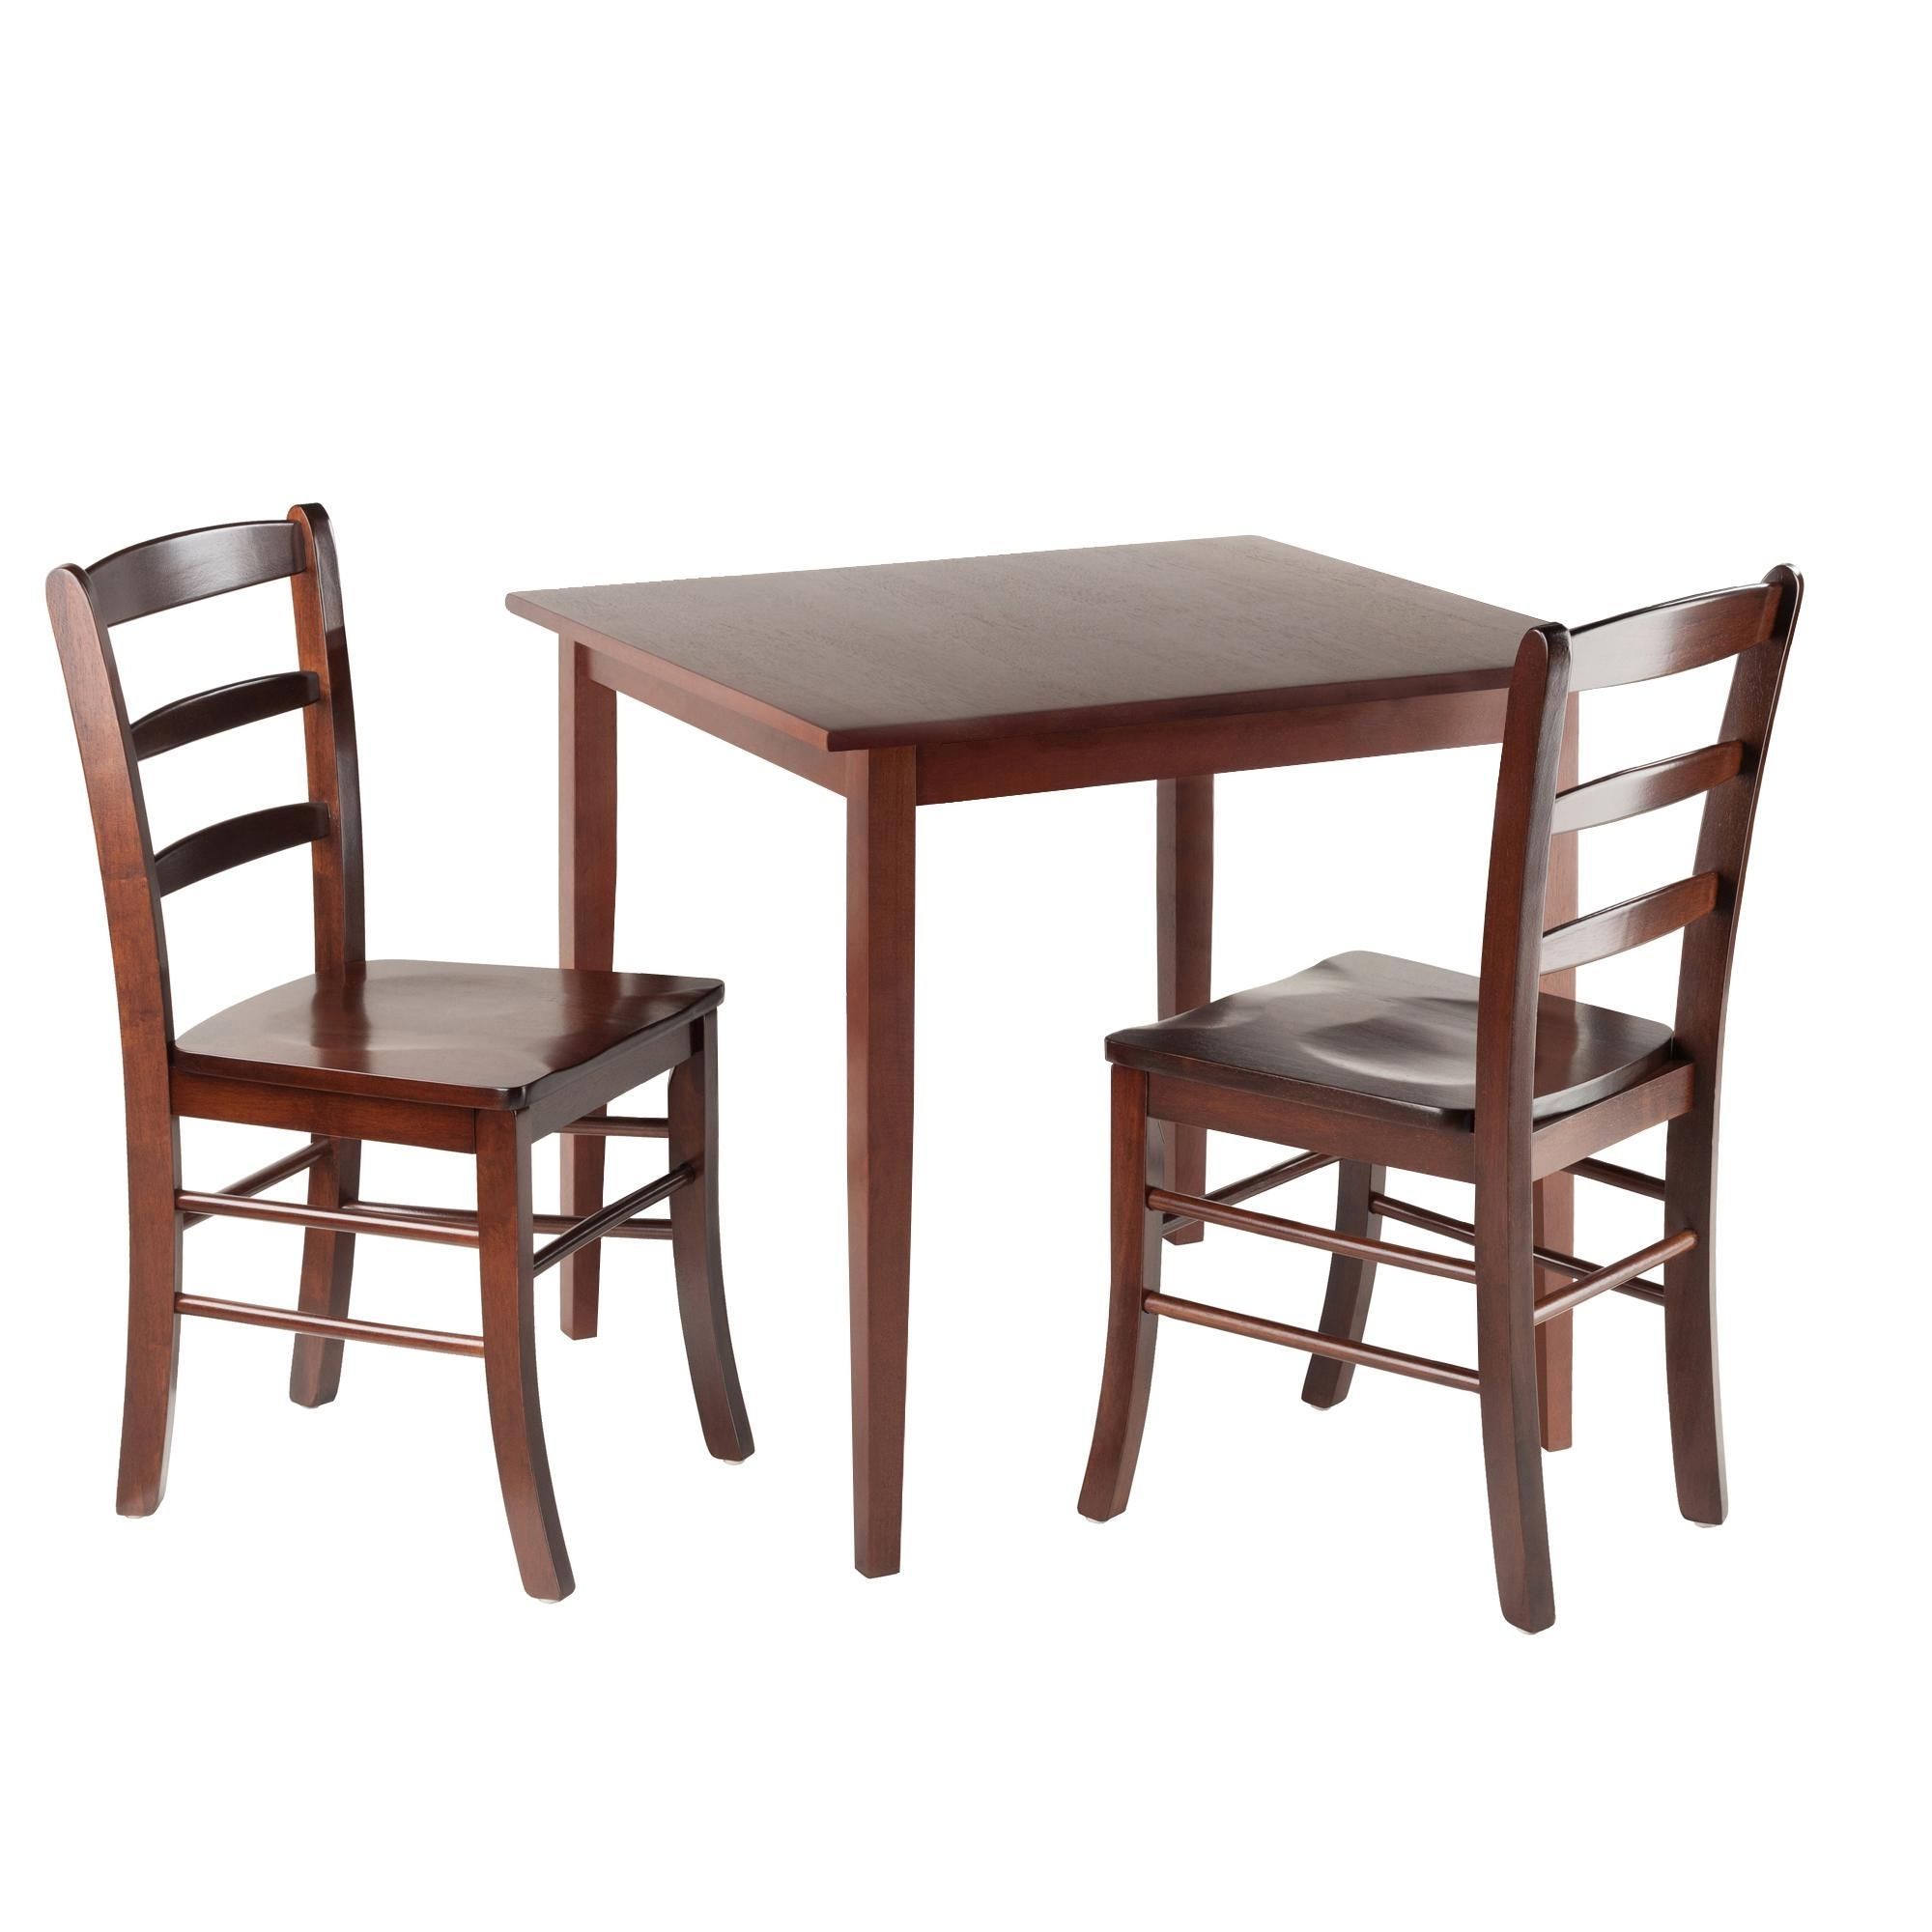 Well Liked Two Seater Dining Tables And Chairs Within Amazon – Winsome Groveland Square Dining Table With 2 Chairs,  (View 4 of 25)